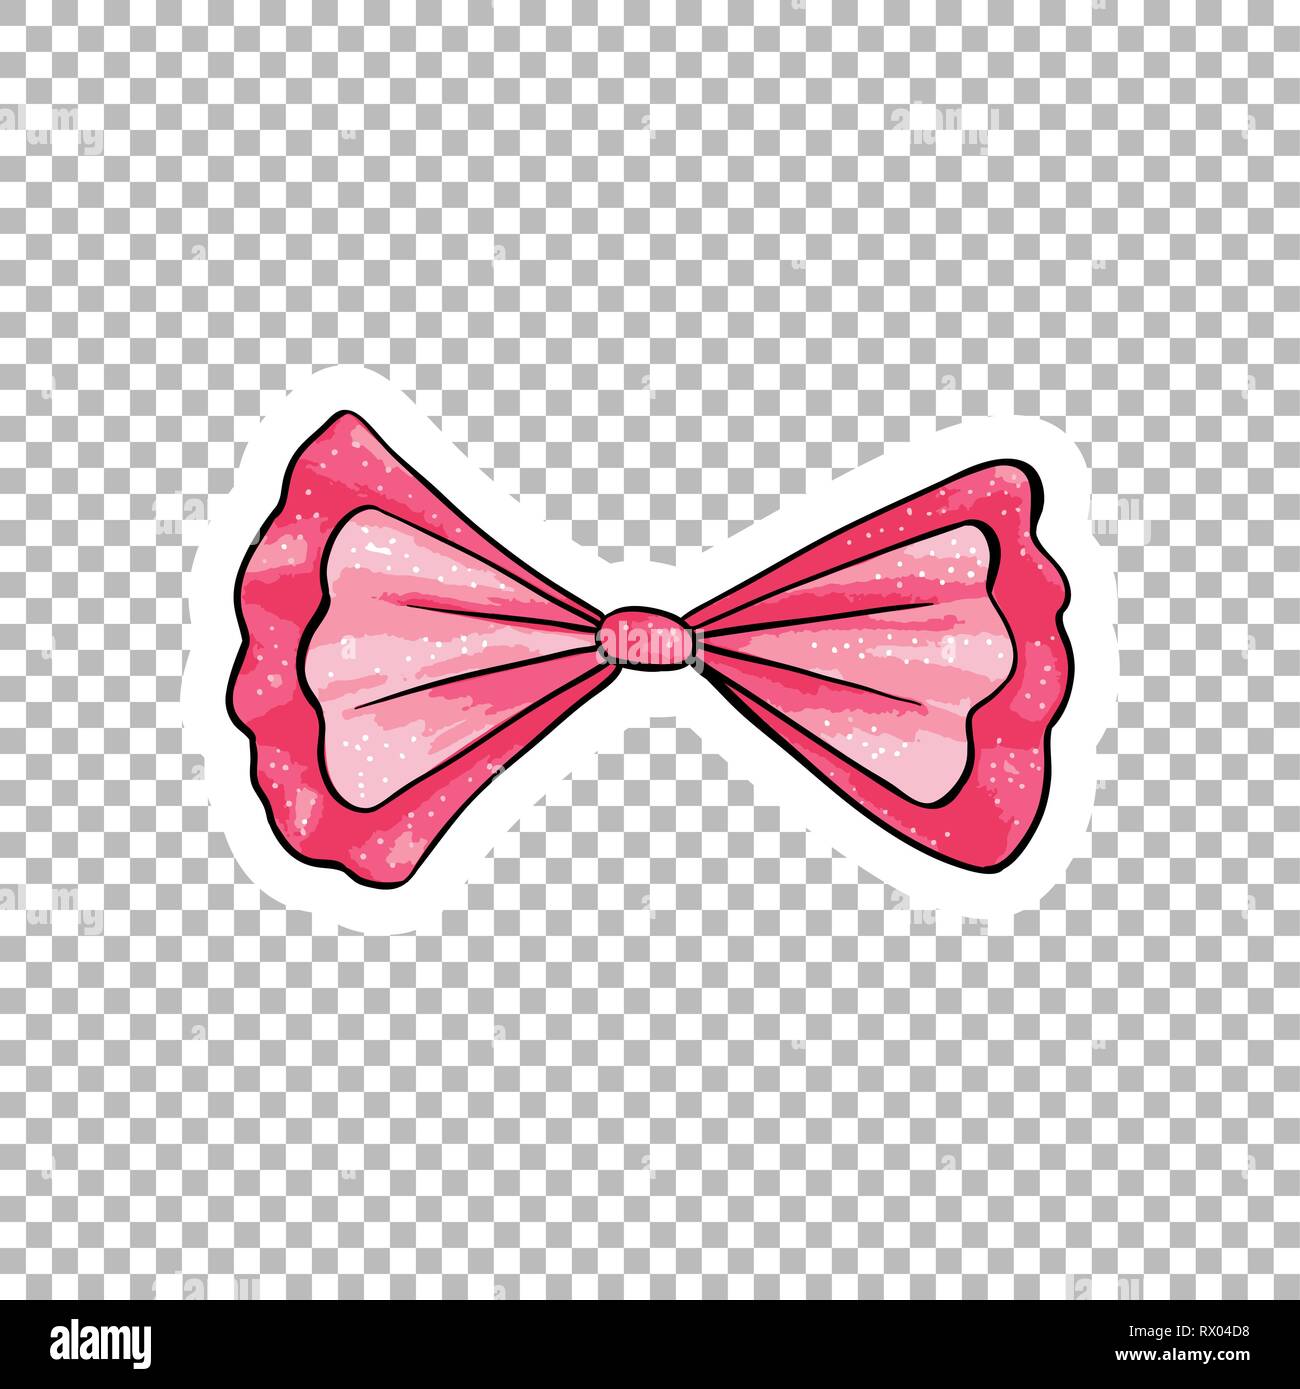 Pink bow hand drawn illustration. Ribbon knot contour drawing on transparent background. Dotted bowknot isolated flat doodle clipart. Bow-tie cartoon sticker. Greeting card watercolor design element Stock Vector